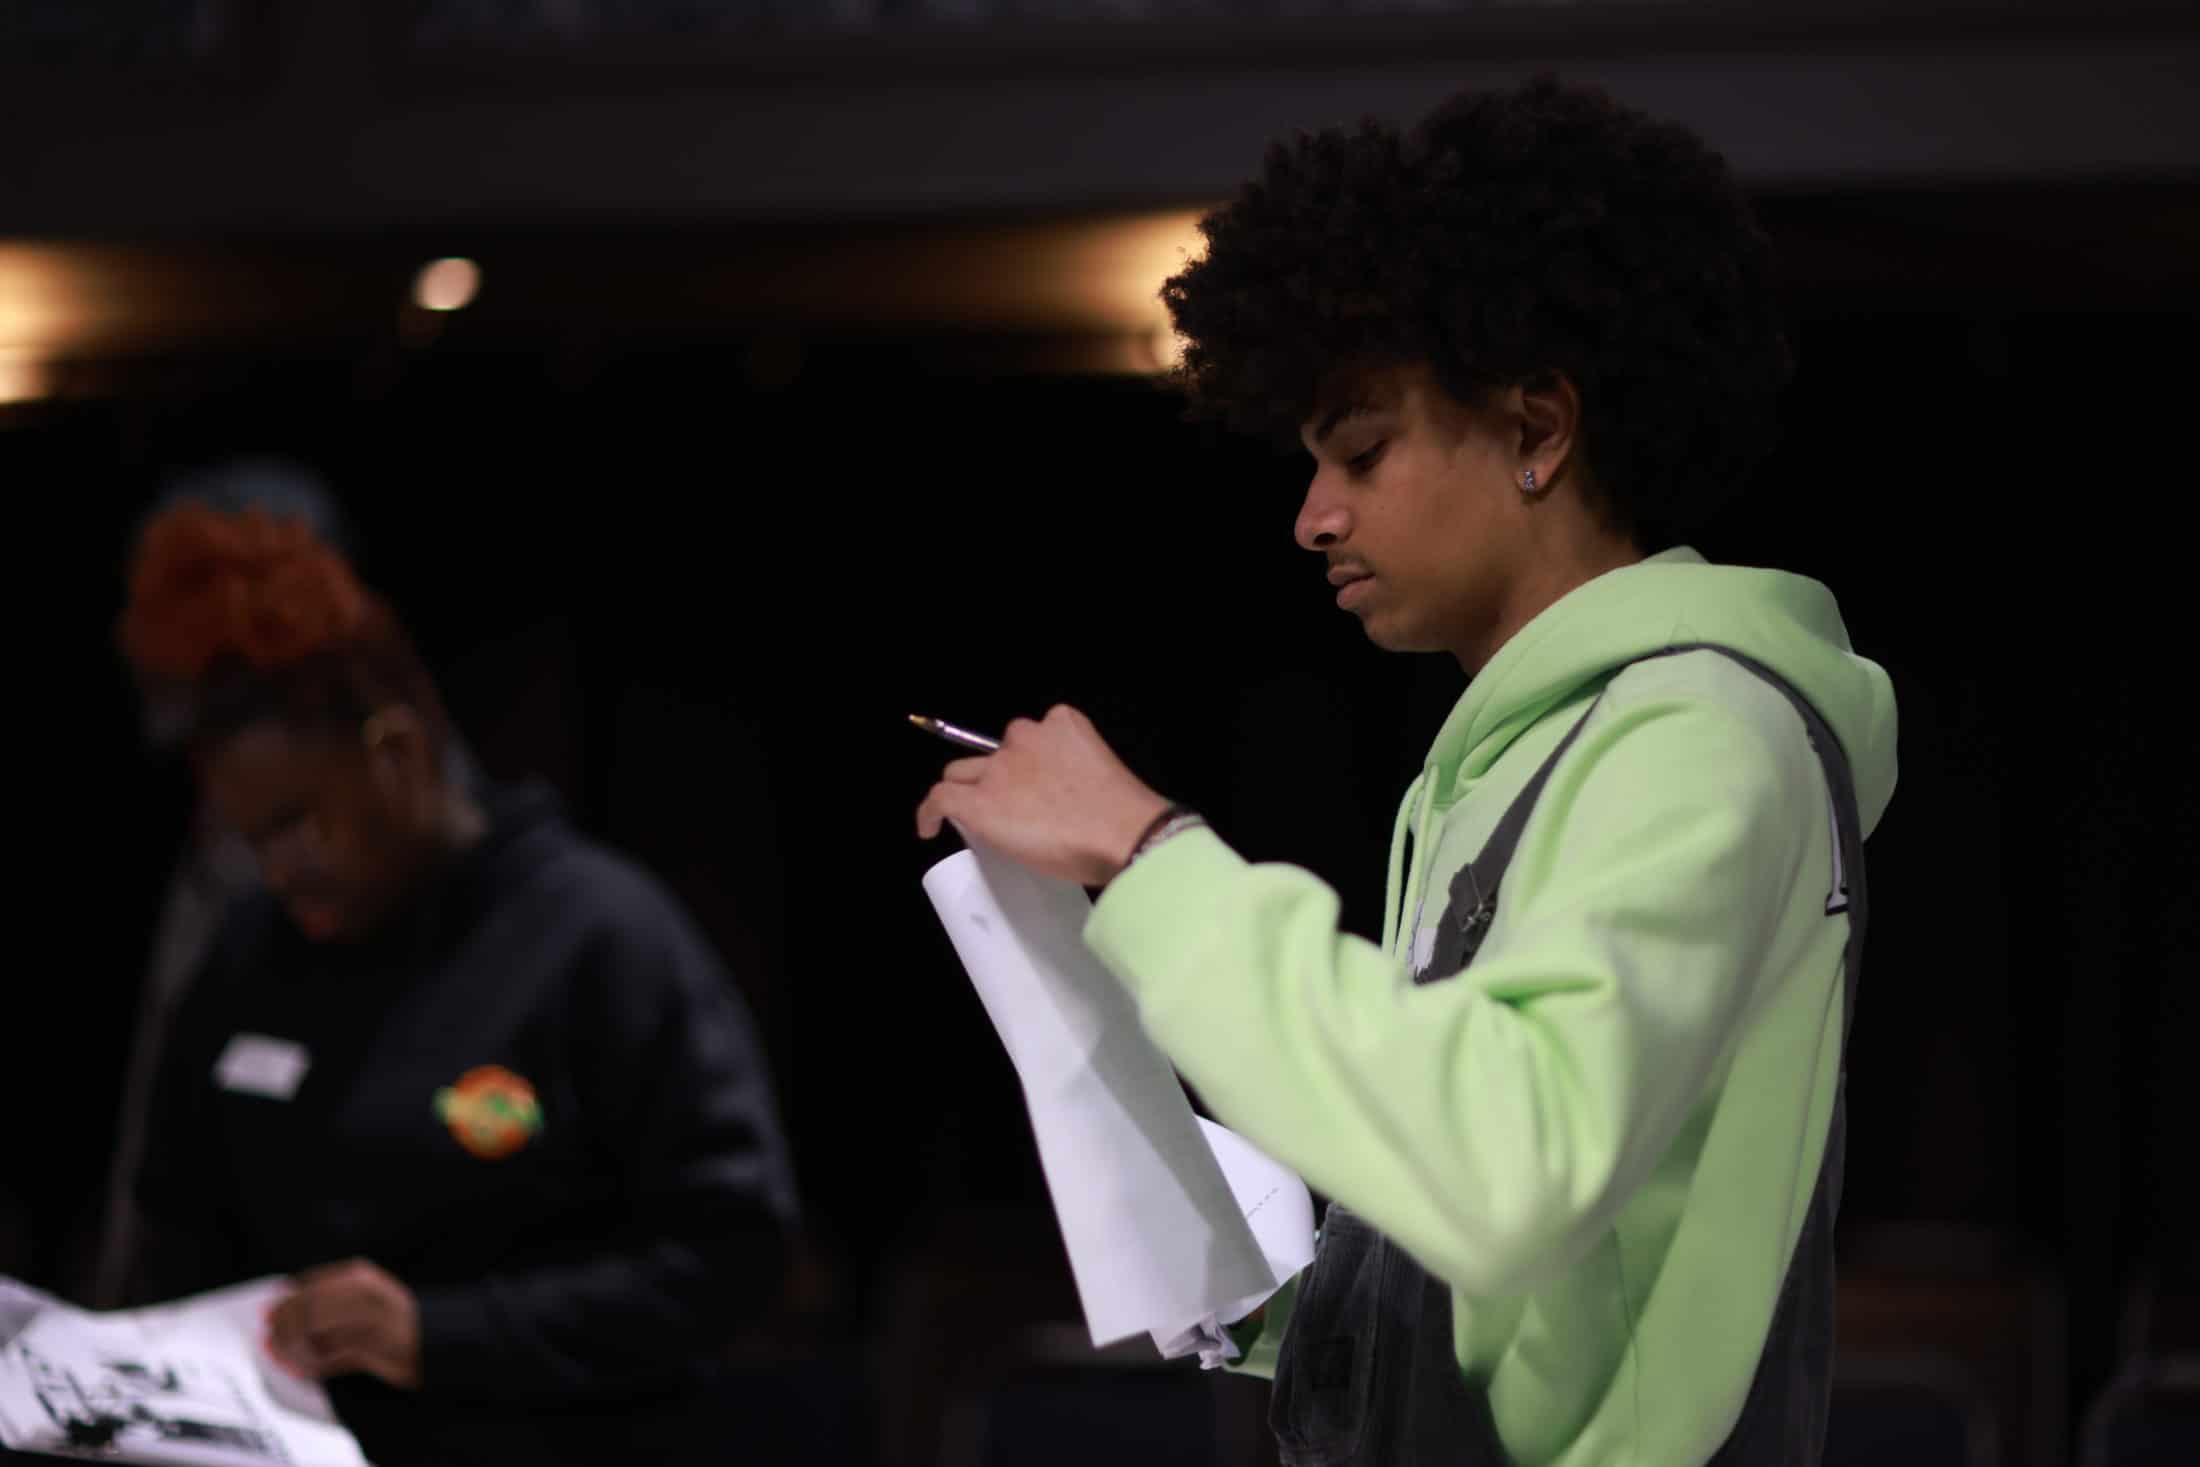 Institute for Contemporary Theatre student with green hoodie holding a script with another student in the background